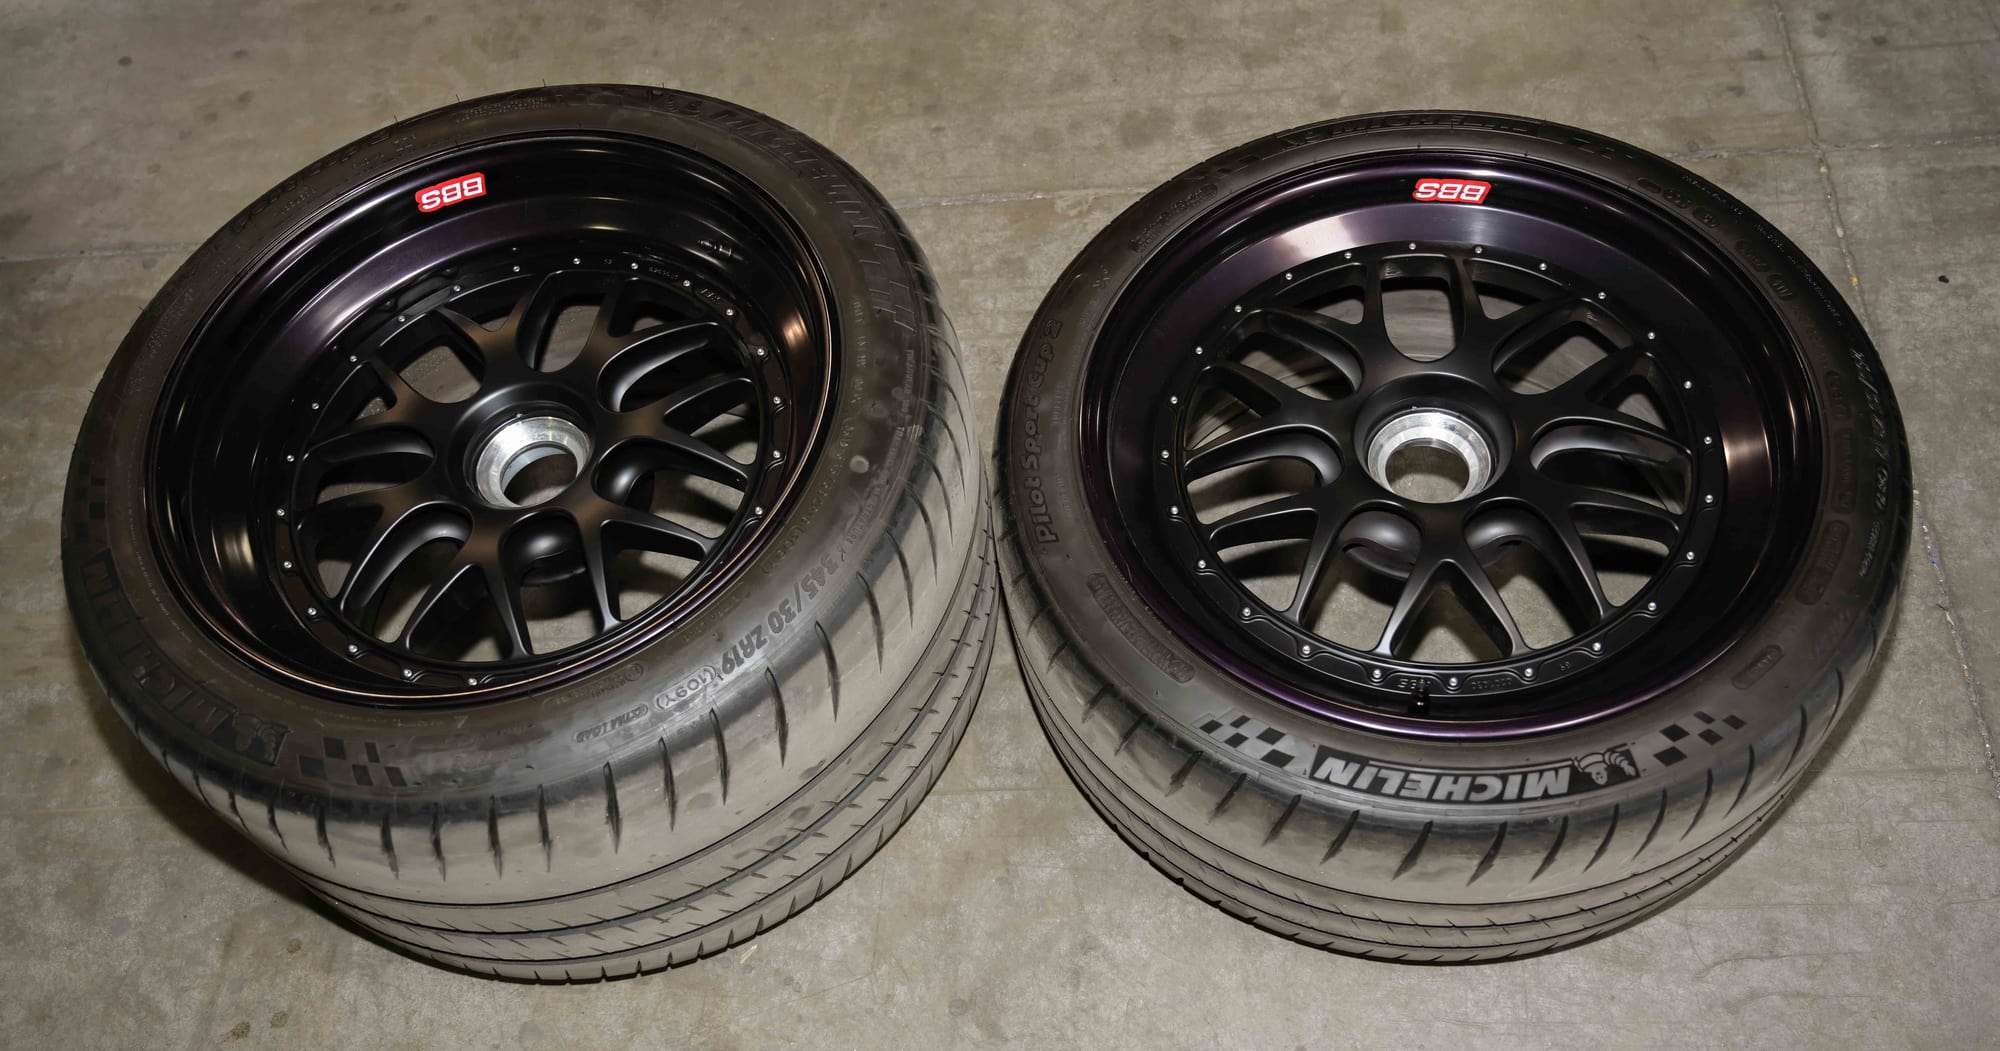 Wheels and Tires/Axles - 19" BBS Wheels for 991 GT3RS - Used - 2016 to 2019 Porsche GT3 - Las Vegas, NV 89118, United States